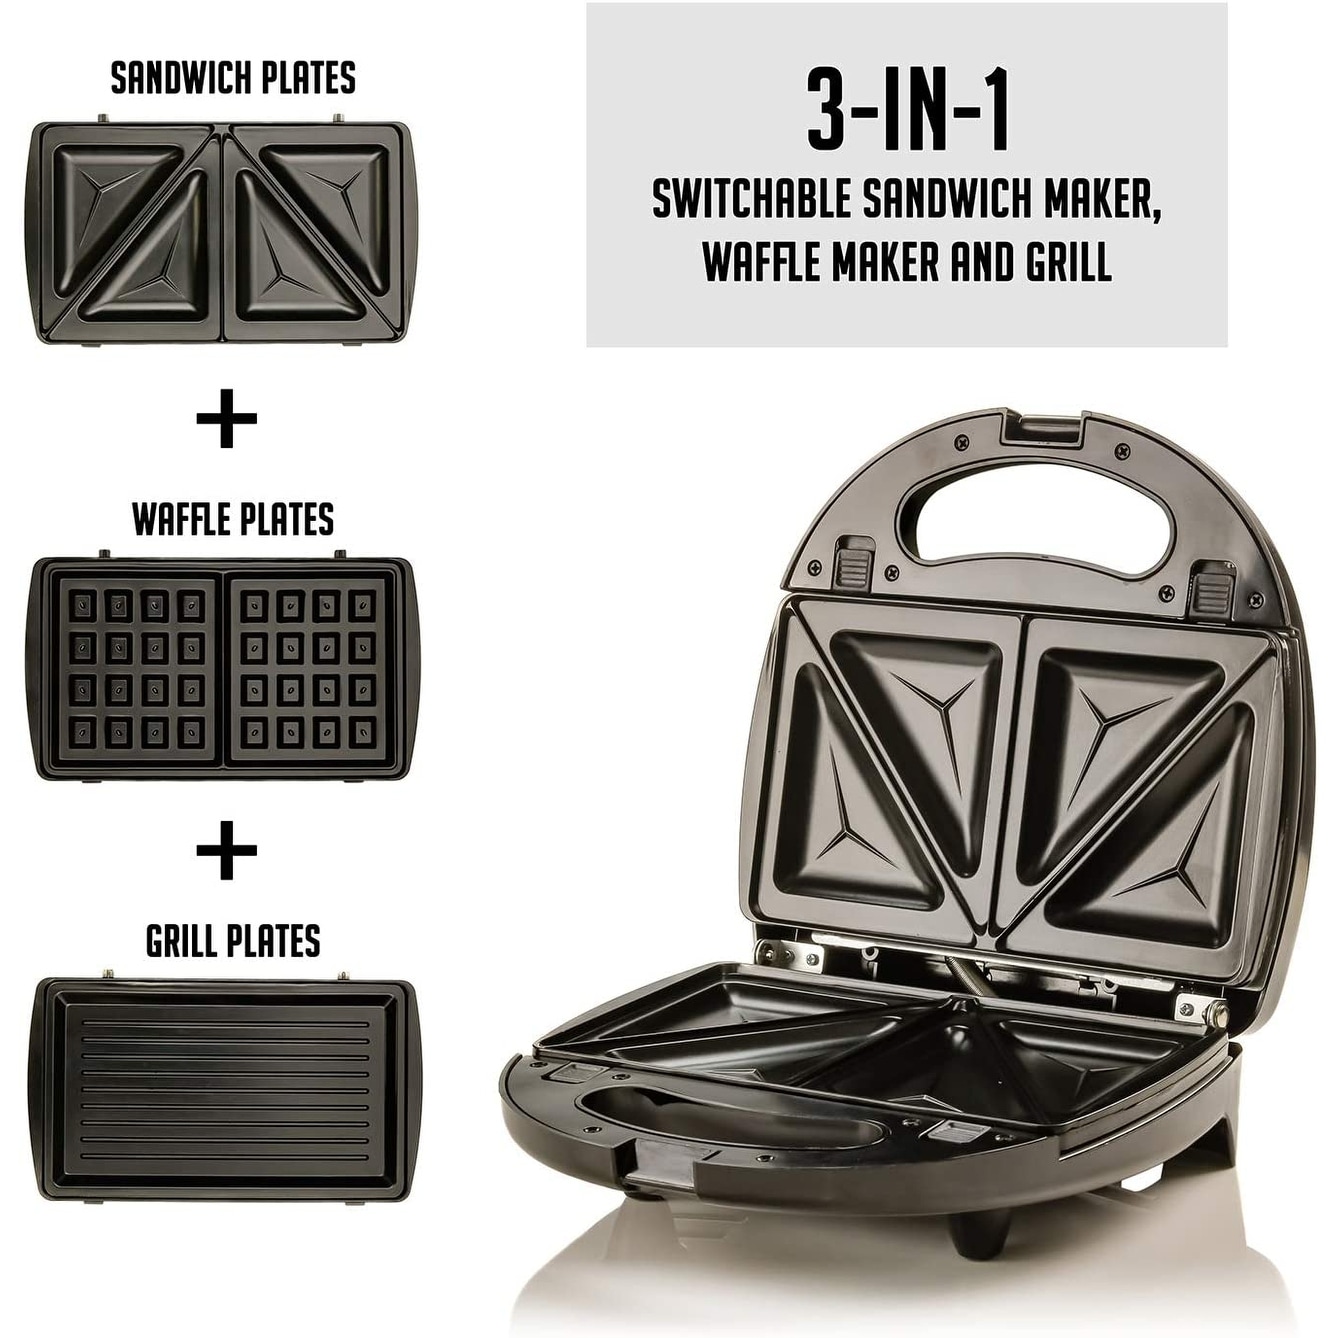 https://ak1.ostkcdn.com/images/products/is/images/direct/fd56125f9f8c8ebc2a11ad4da8ac935caaa9e688/Ovente-Electric-Indoor-Sandwich-Grill-Waffle-Maker-Set-with-3-Removable-Non-Stick-Cast-Iron-Cooking-Plates%2C-Black-GPI302B.jpg